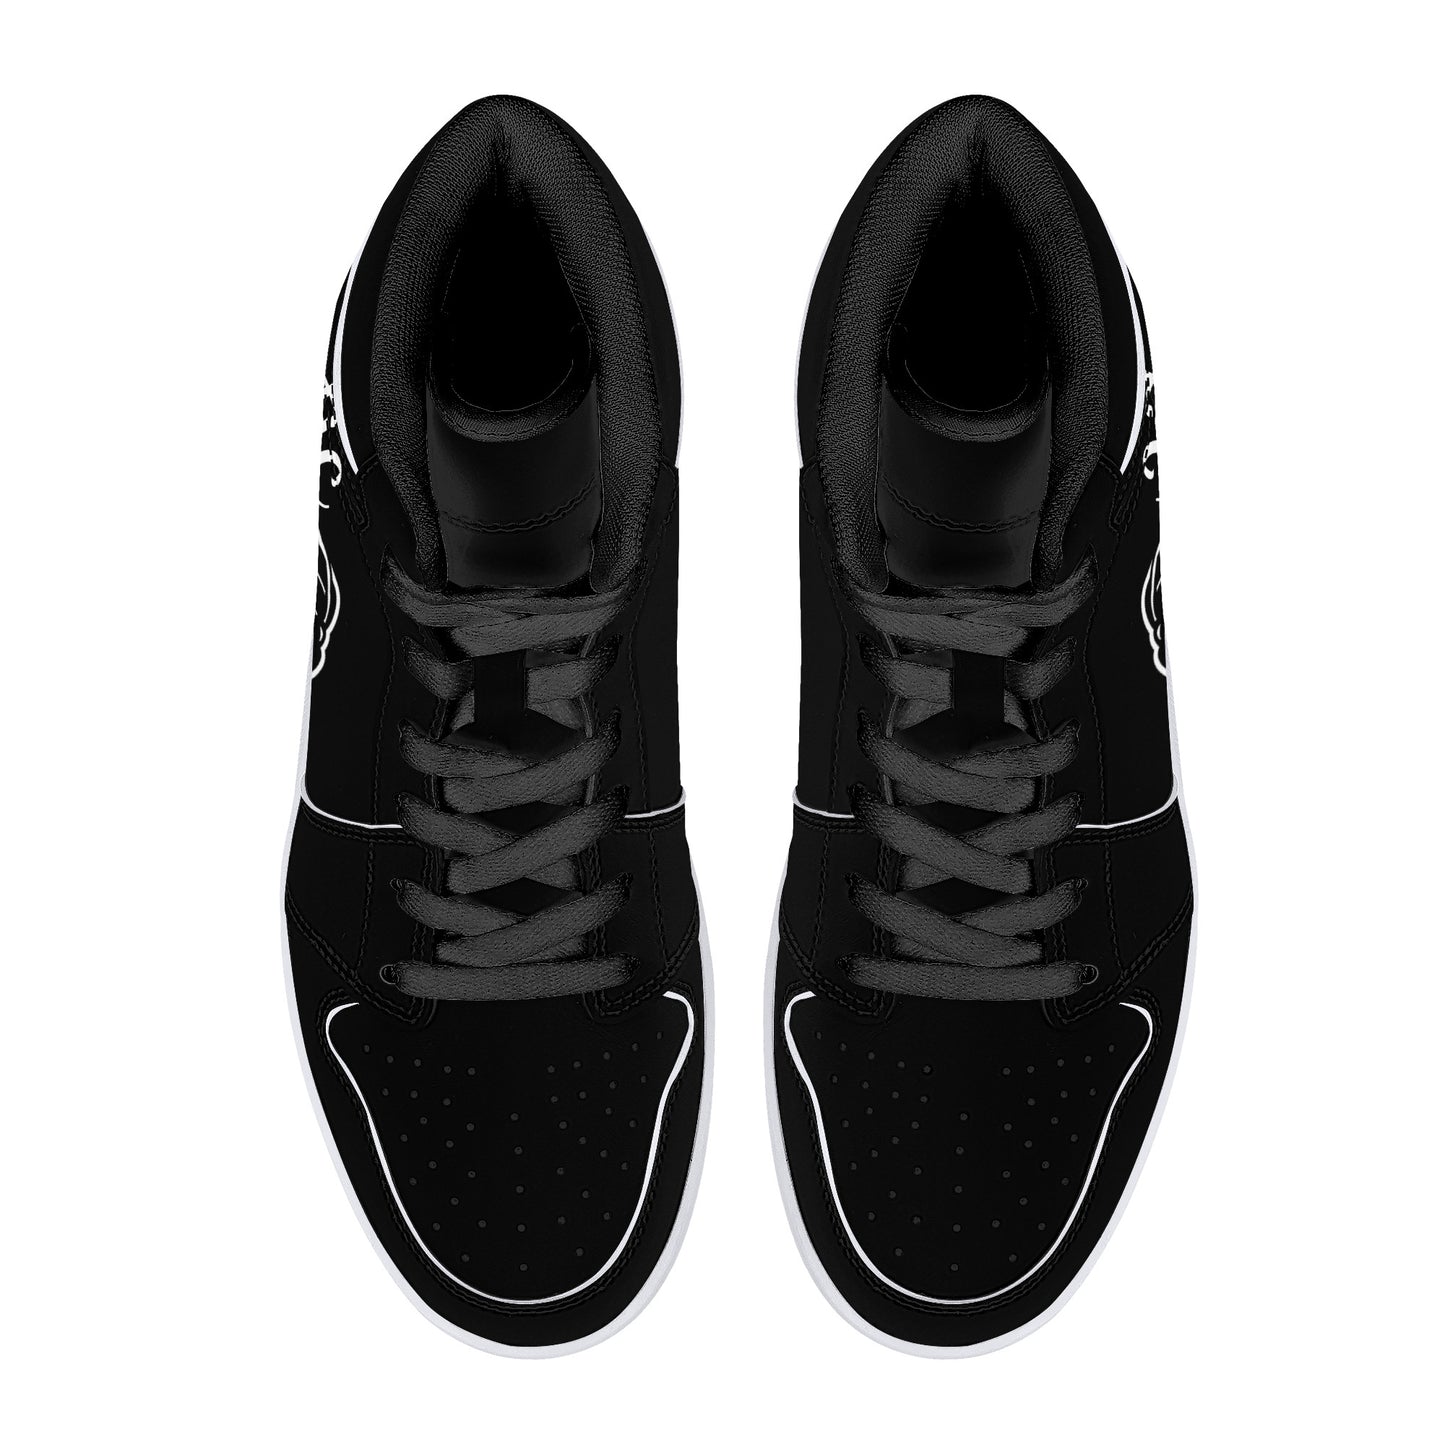 Cryptic High-Top Synthetic Leather Sneakers, Black